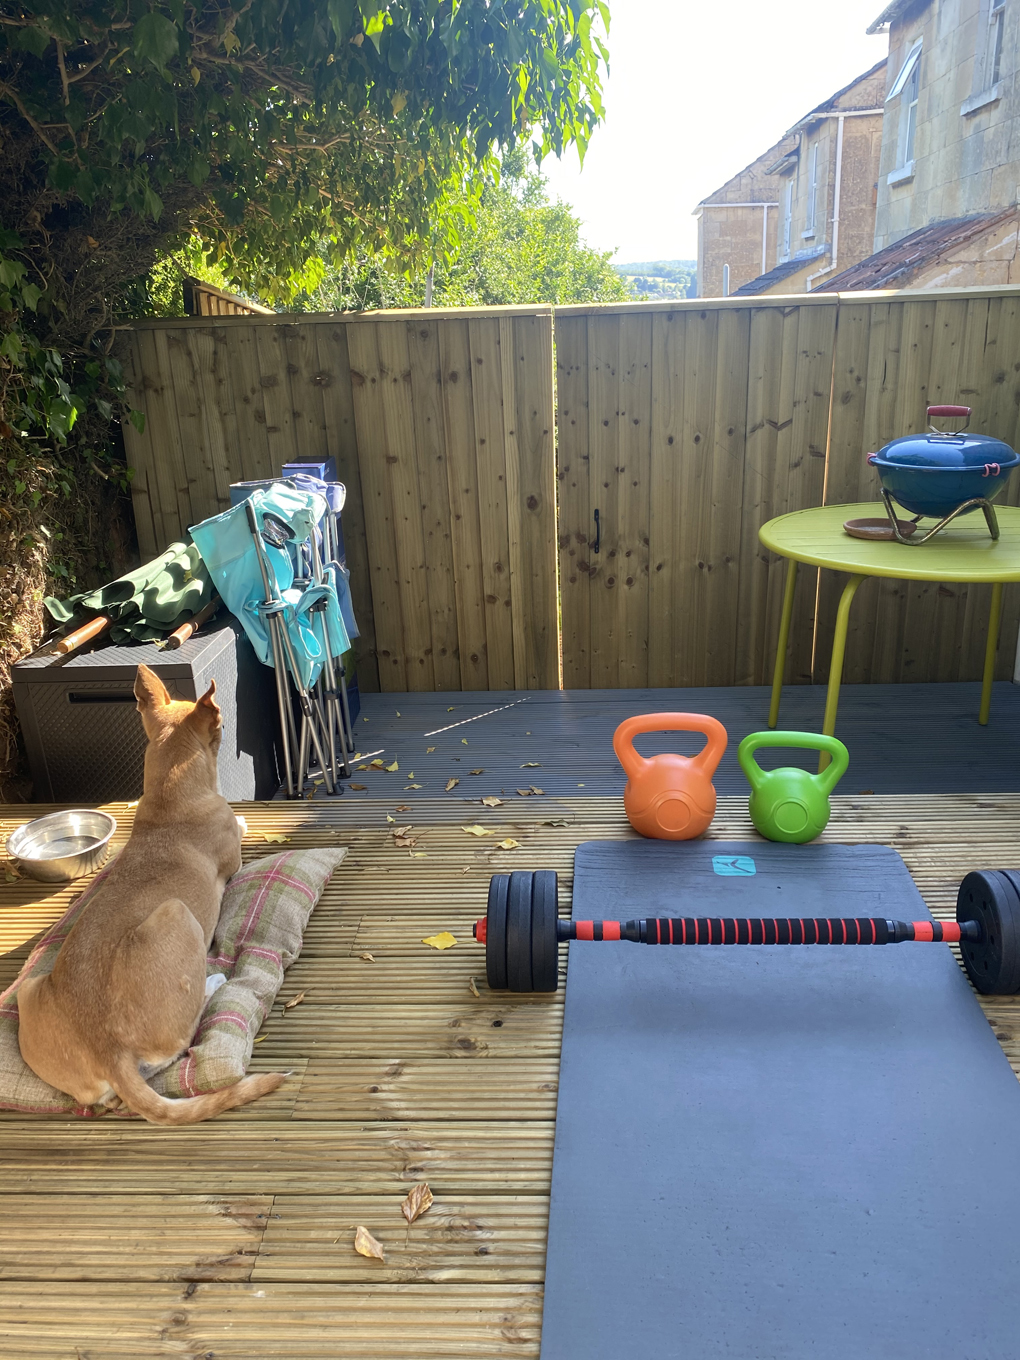 An exercise mat and some weights in a small back garden. There’s a dog laying down next to the mat looking sleepy.